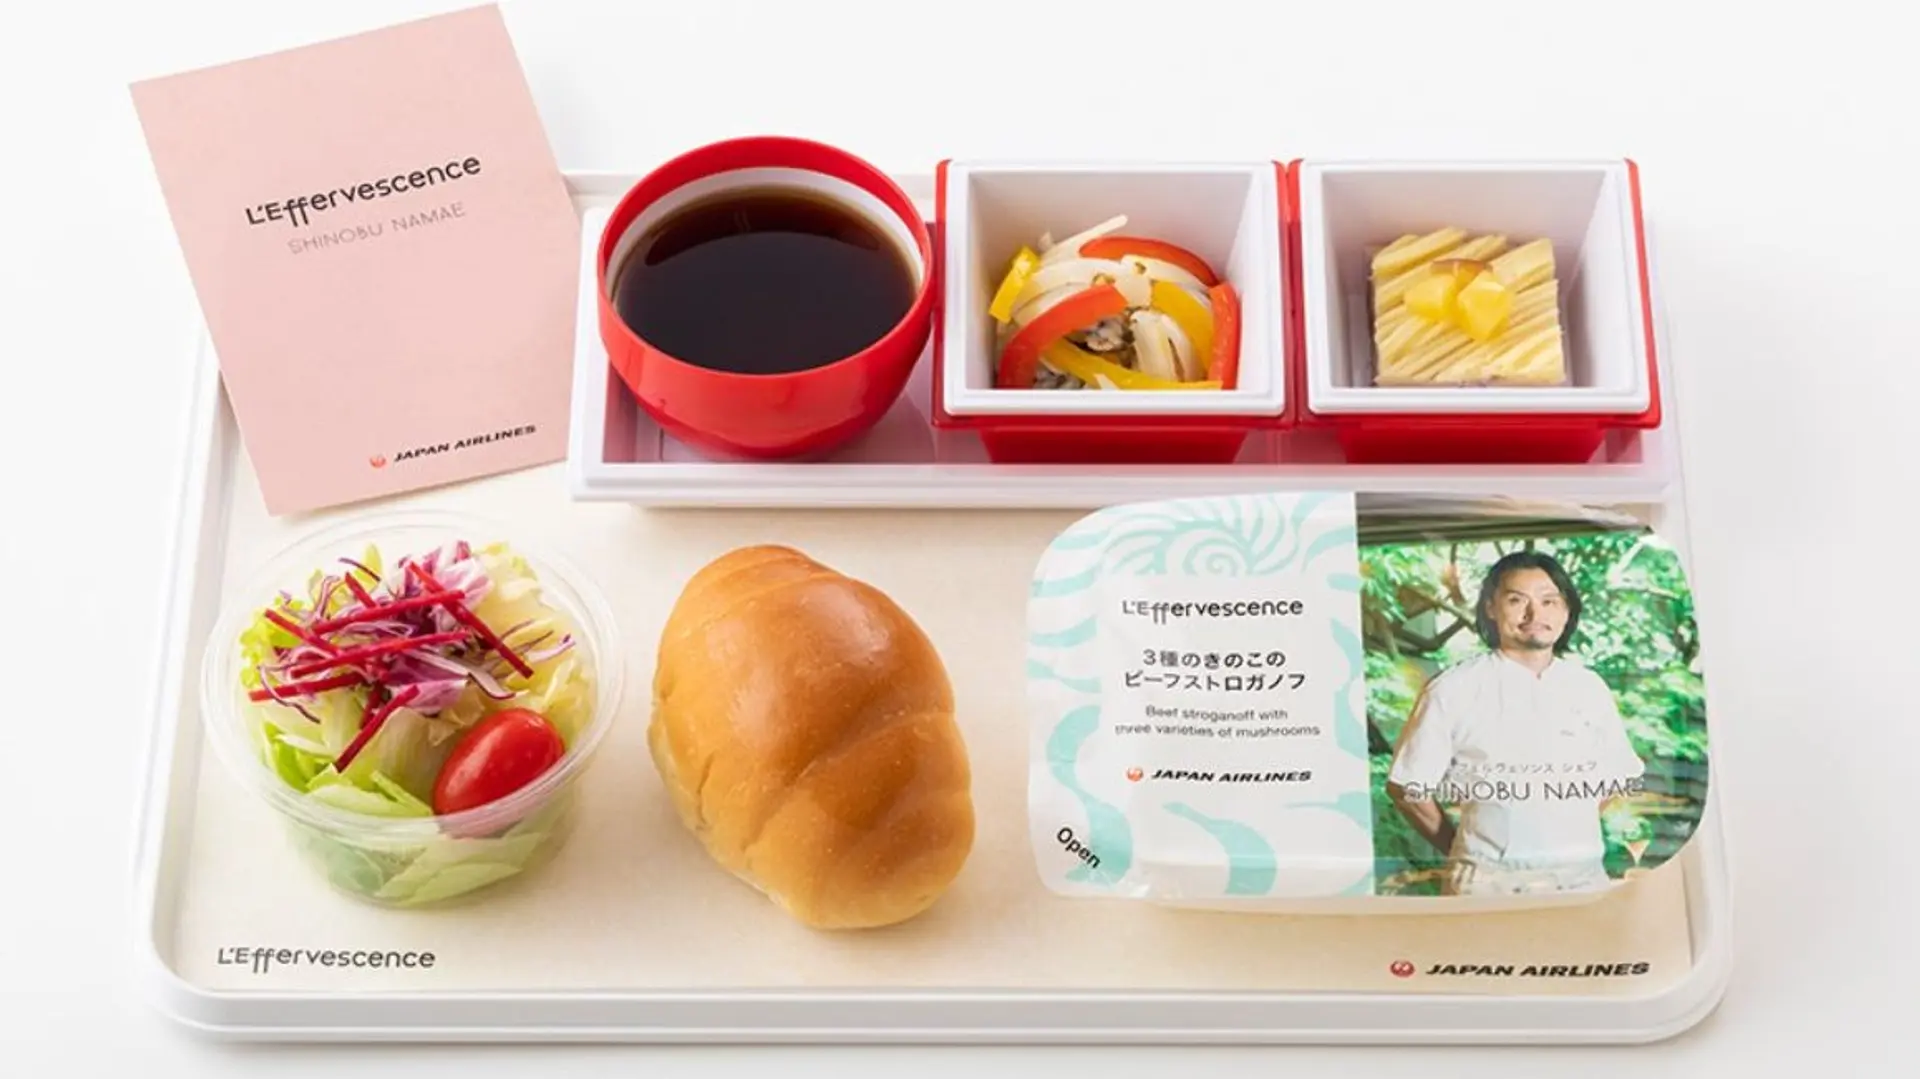 Airline review Cuisine - Japan Airlines - 7